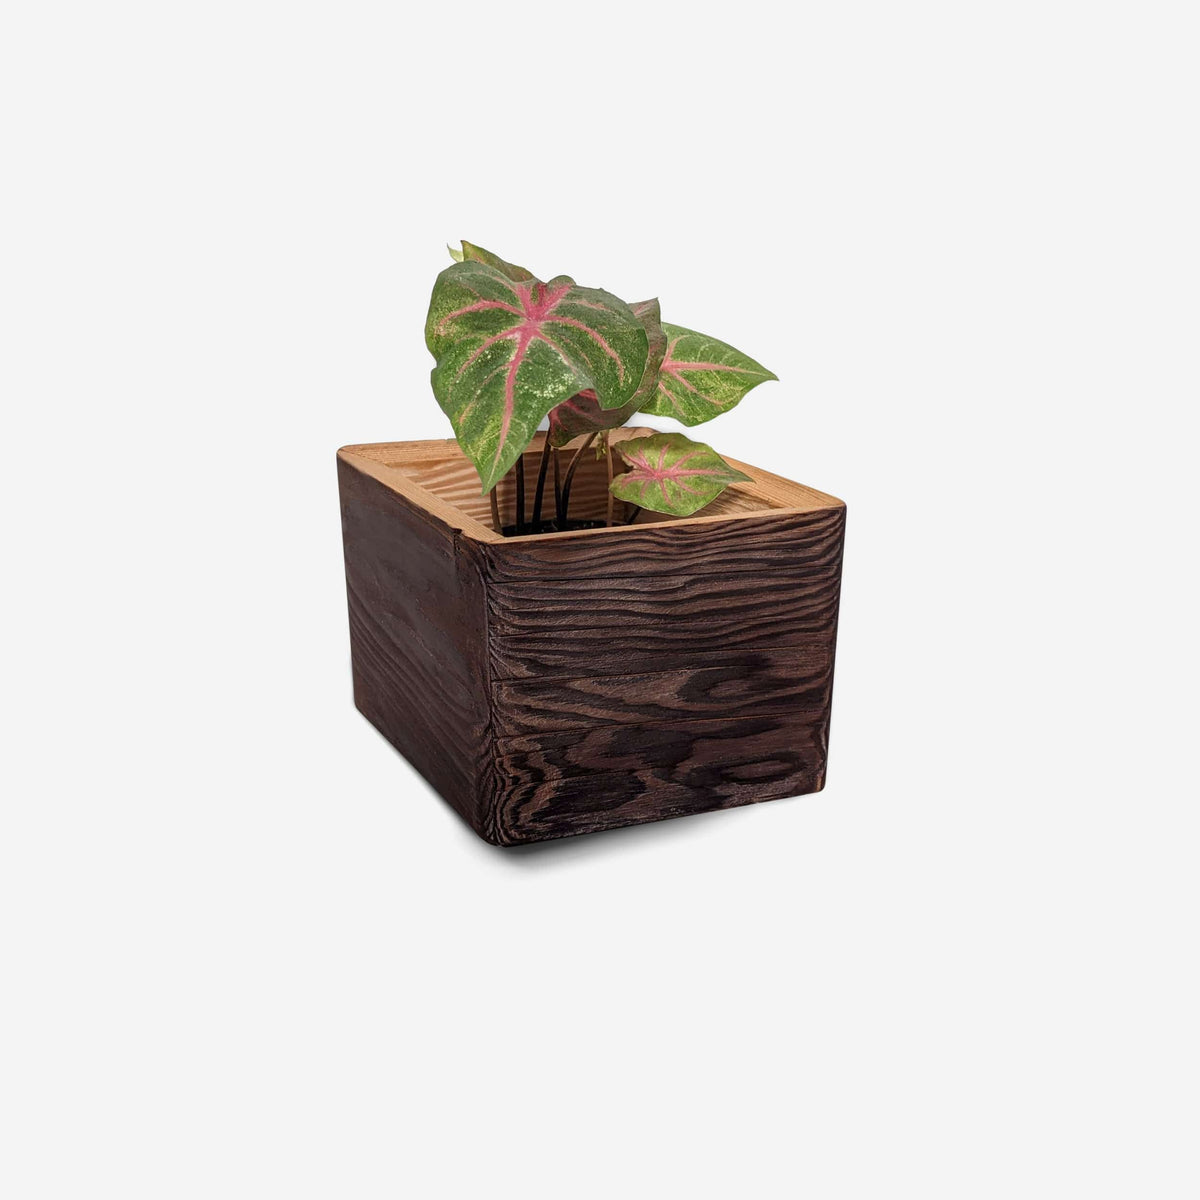 Formr Bling (4&quot; pot) / Brushed brown / One Diamond Self-Watering, Wall-Mounted Planter by Formr